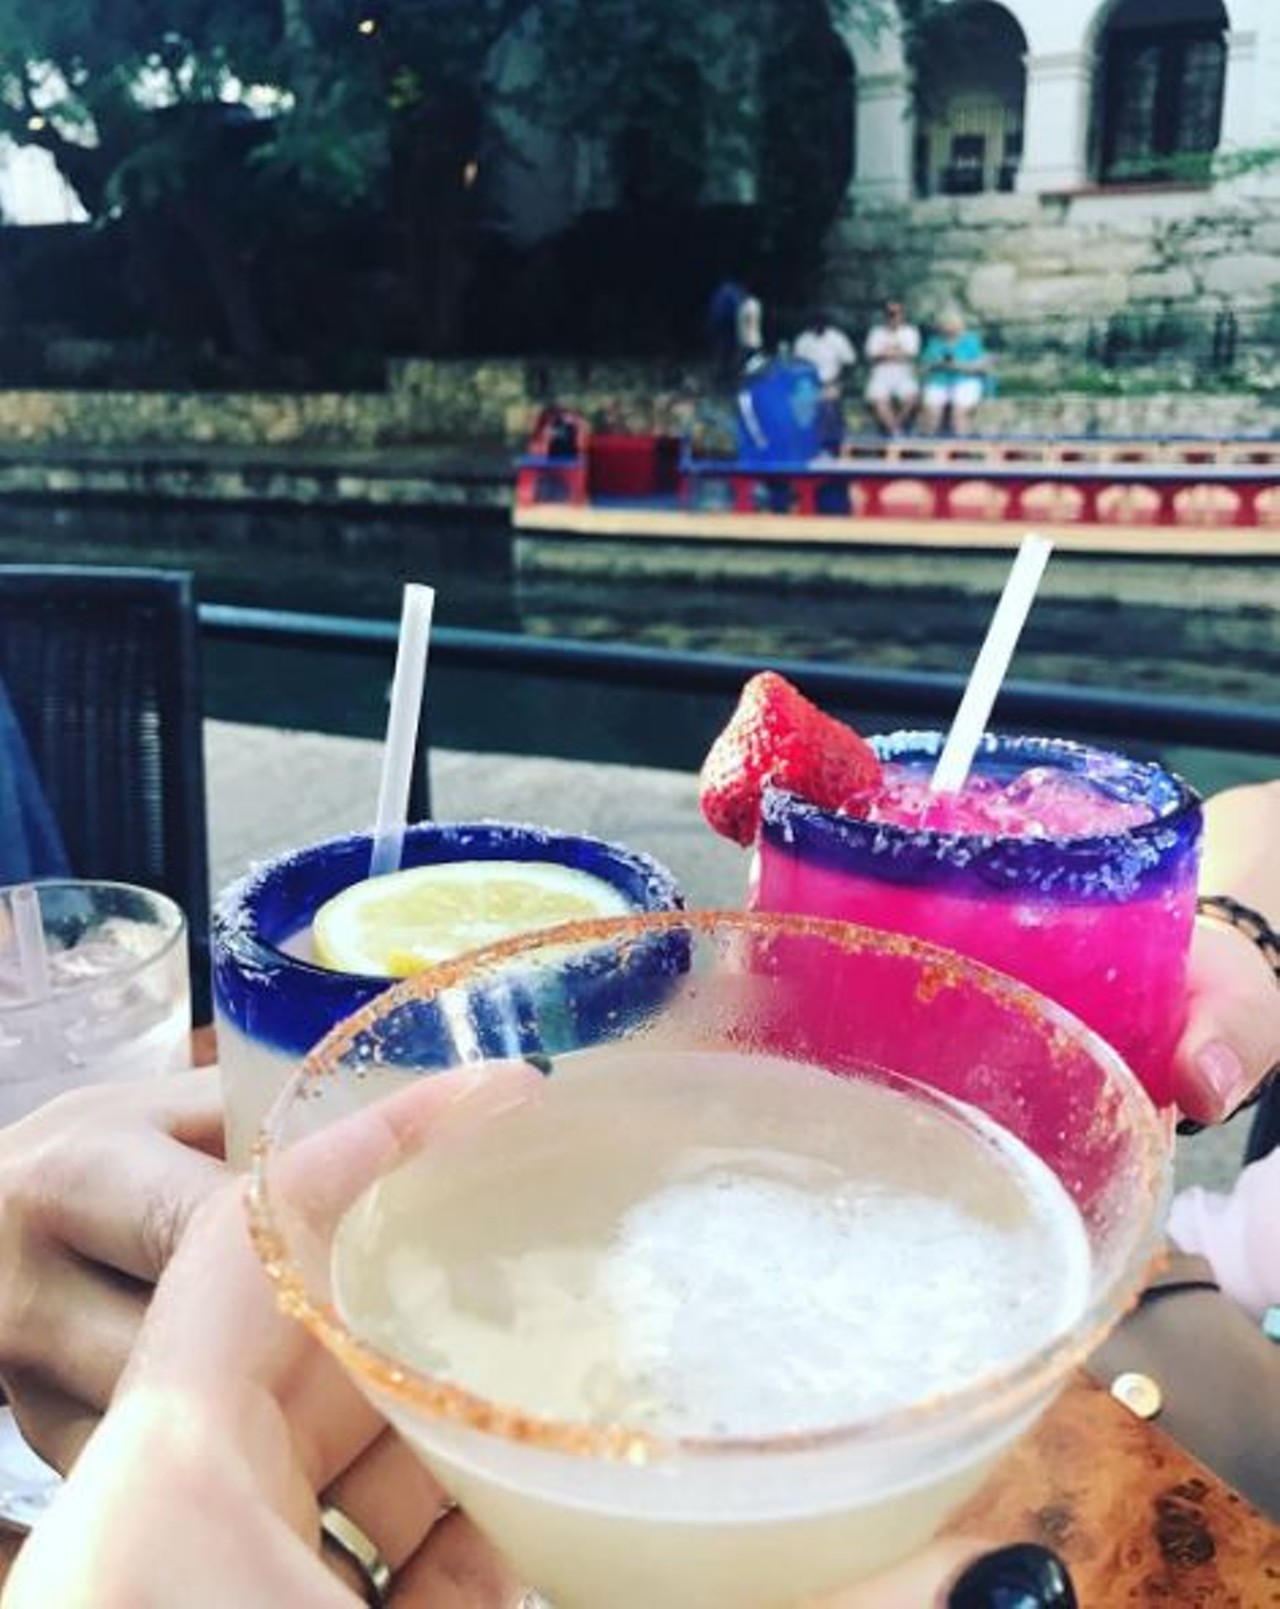 Drink margaritas on the River Walk
849 E. Commerce Street, (800) 313-7960, thesanantonioriverwalk.com
Any time of the year is great, but that spring weather makes it just perfect.
Photo via Instagram, davislivvy